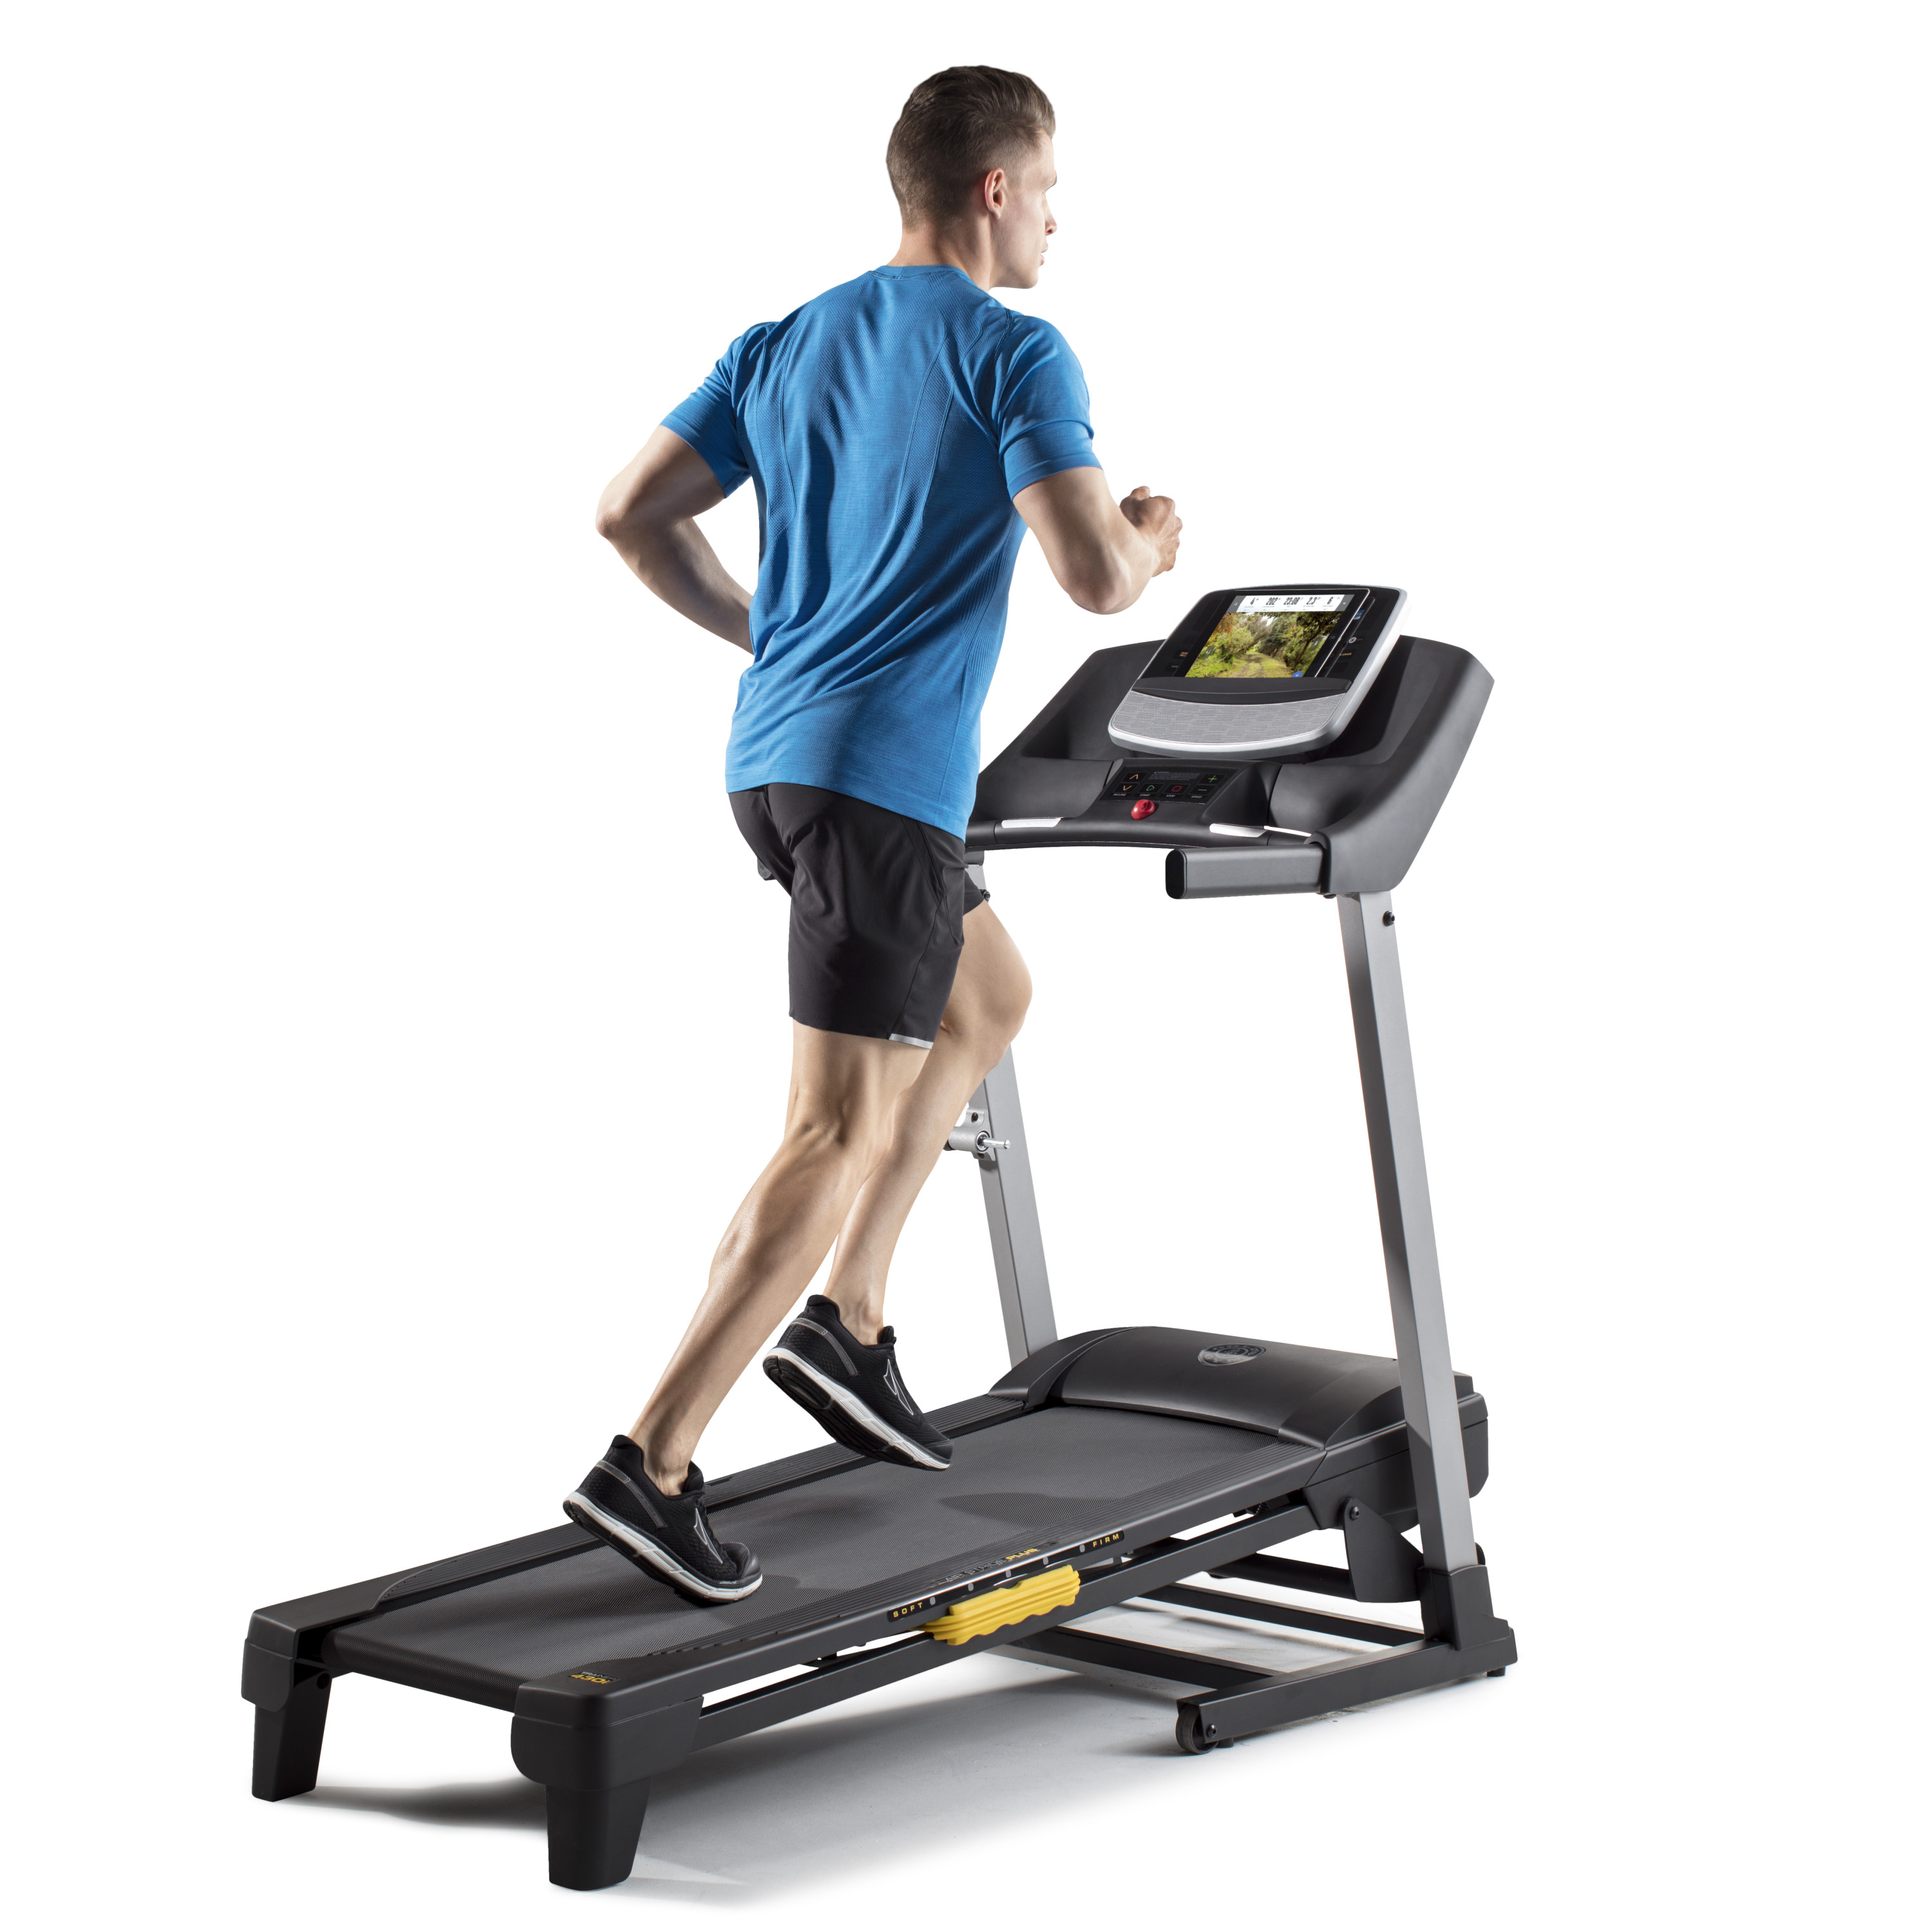 ProForm Trainer 430i Folding Smart Treadmill with 10% Incline, iFit Bluetooth Enabled - image 15 of 18